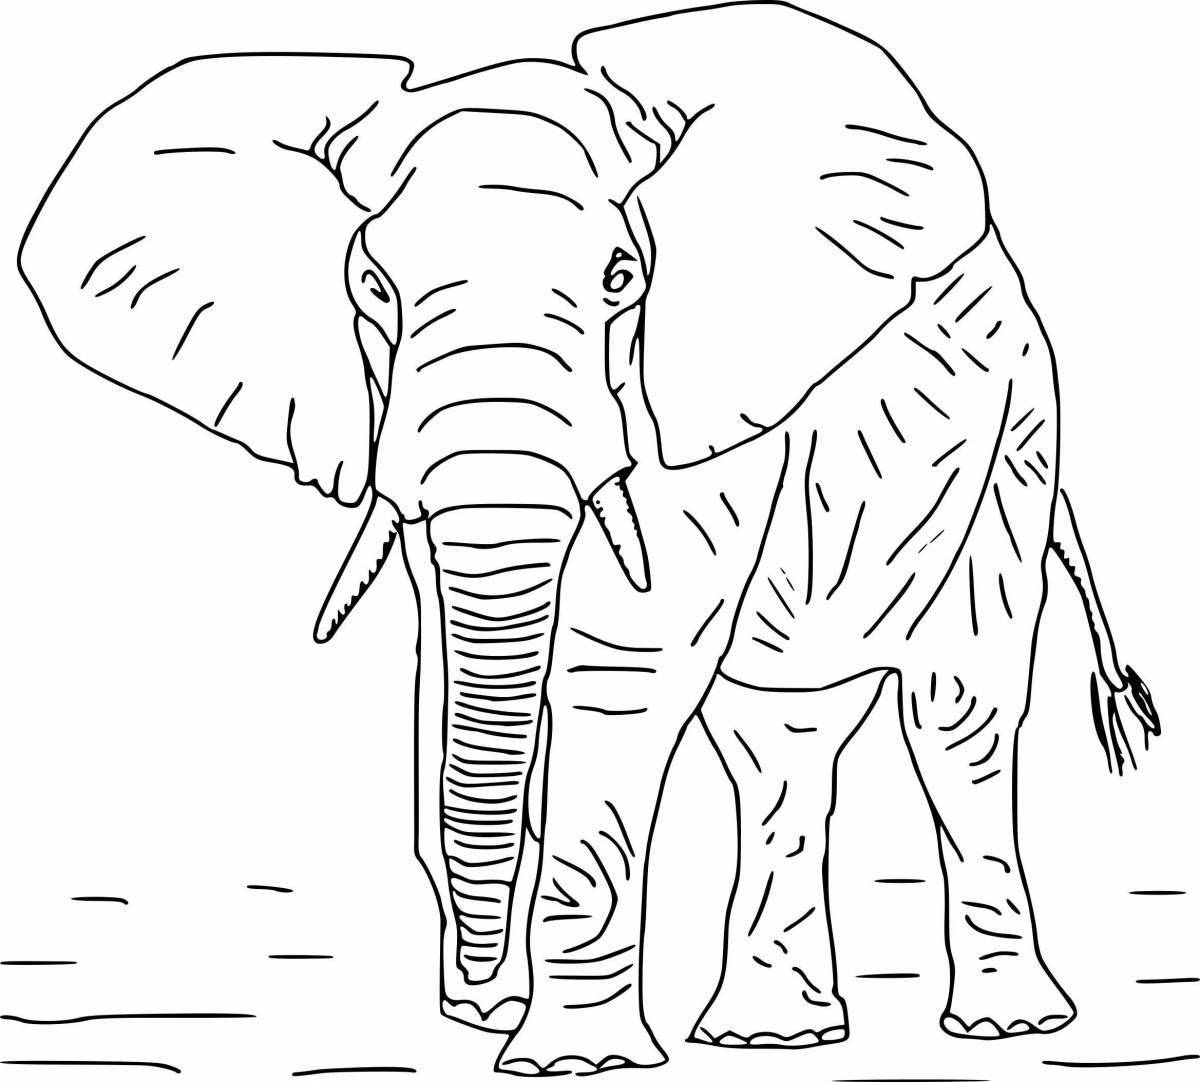 Colorfully detailed African elephant coloring page